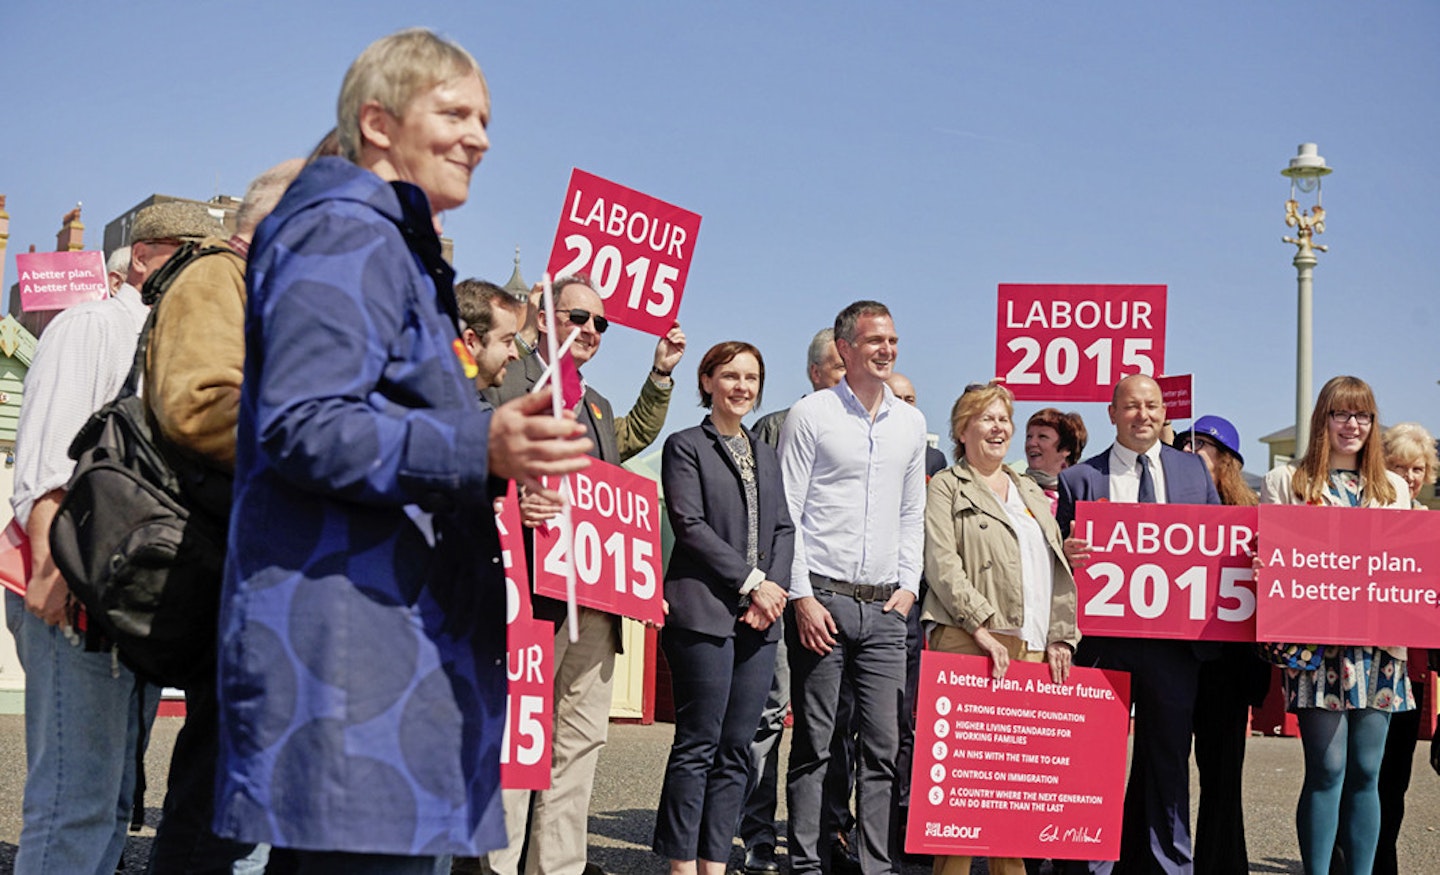 Justine Miliband rallying Labour voters in Brighton [Amit Lennon]